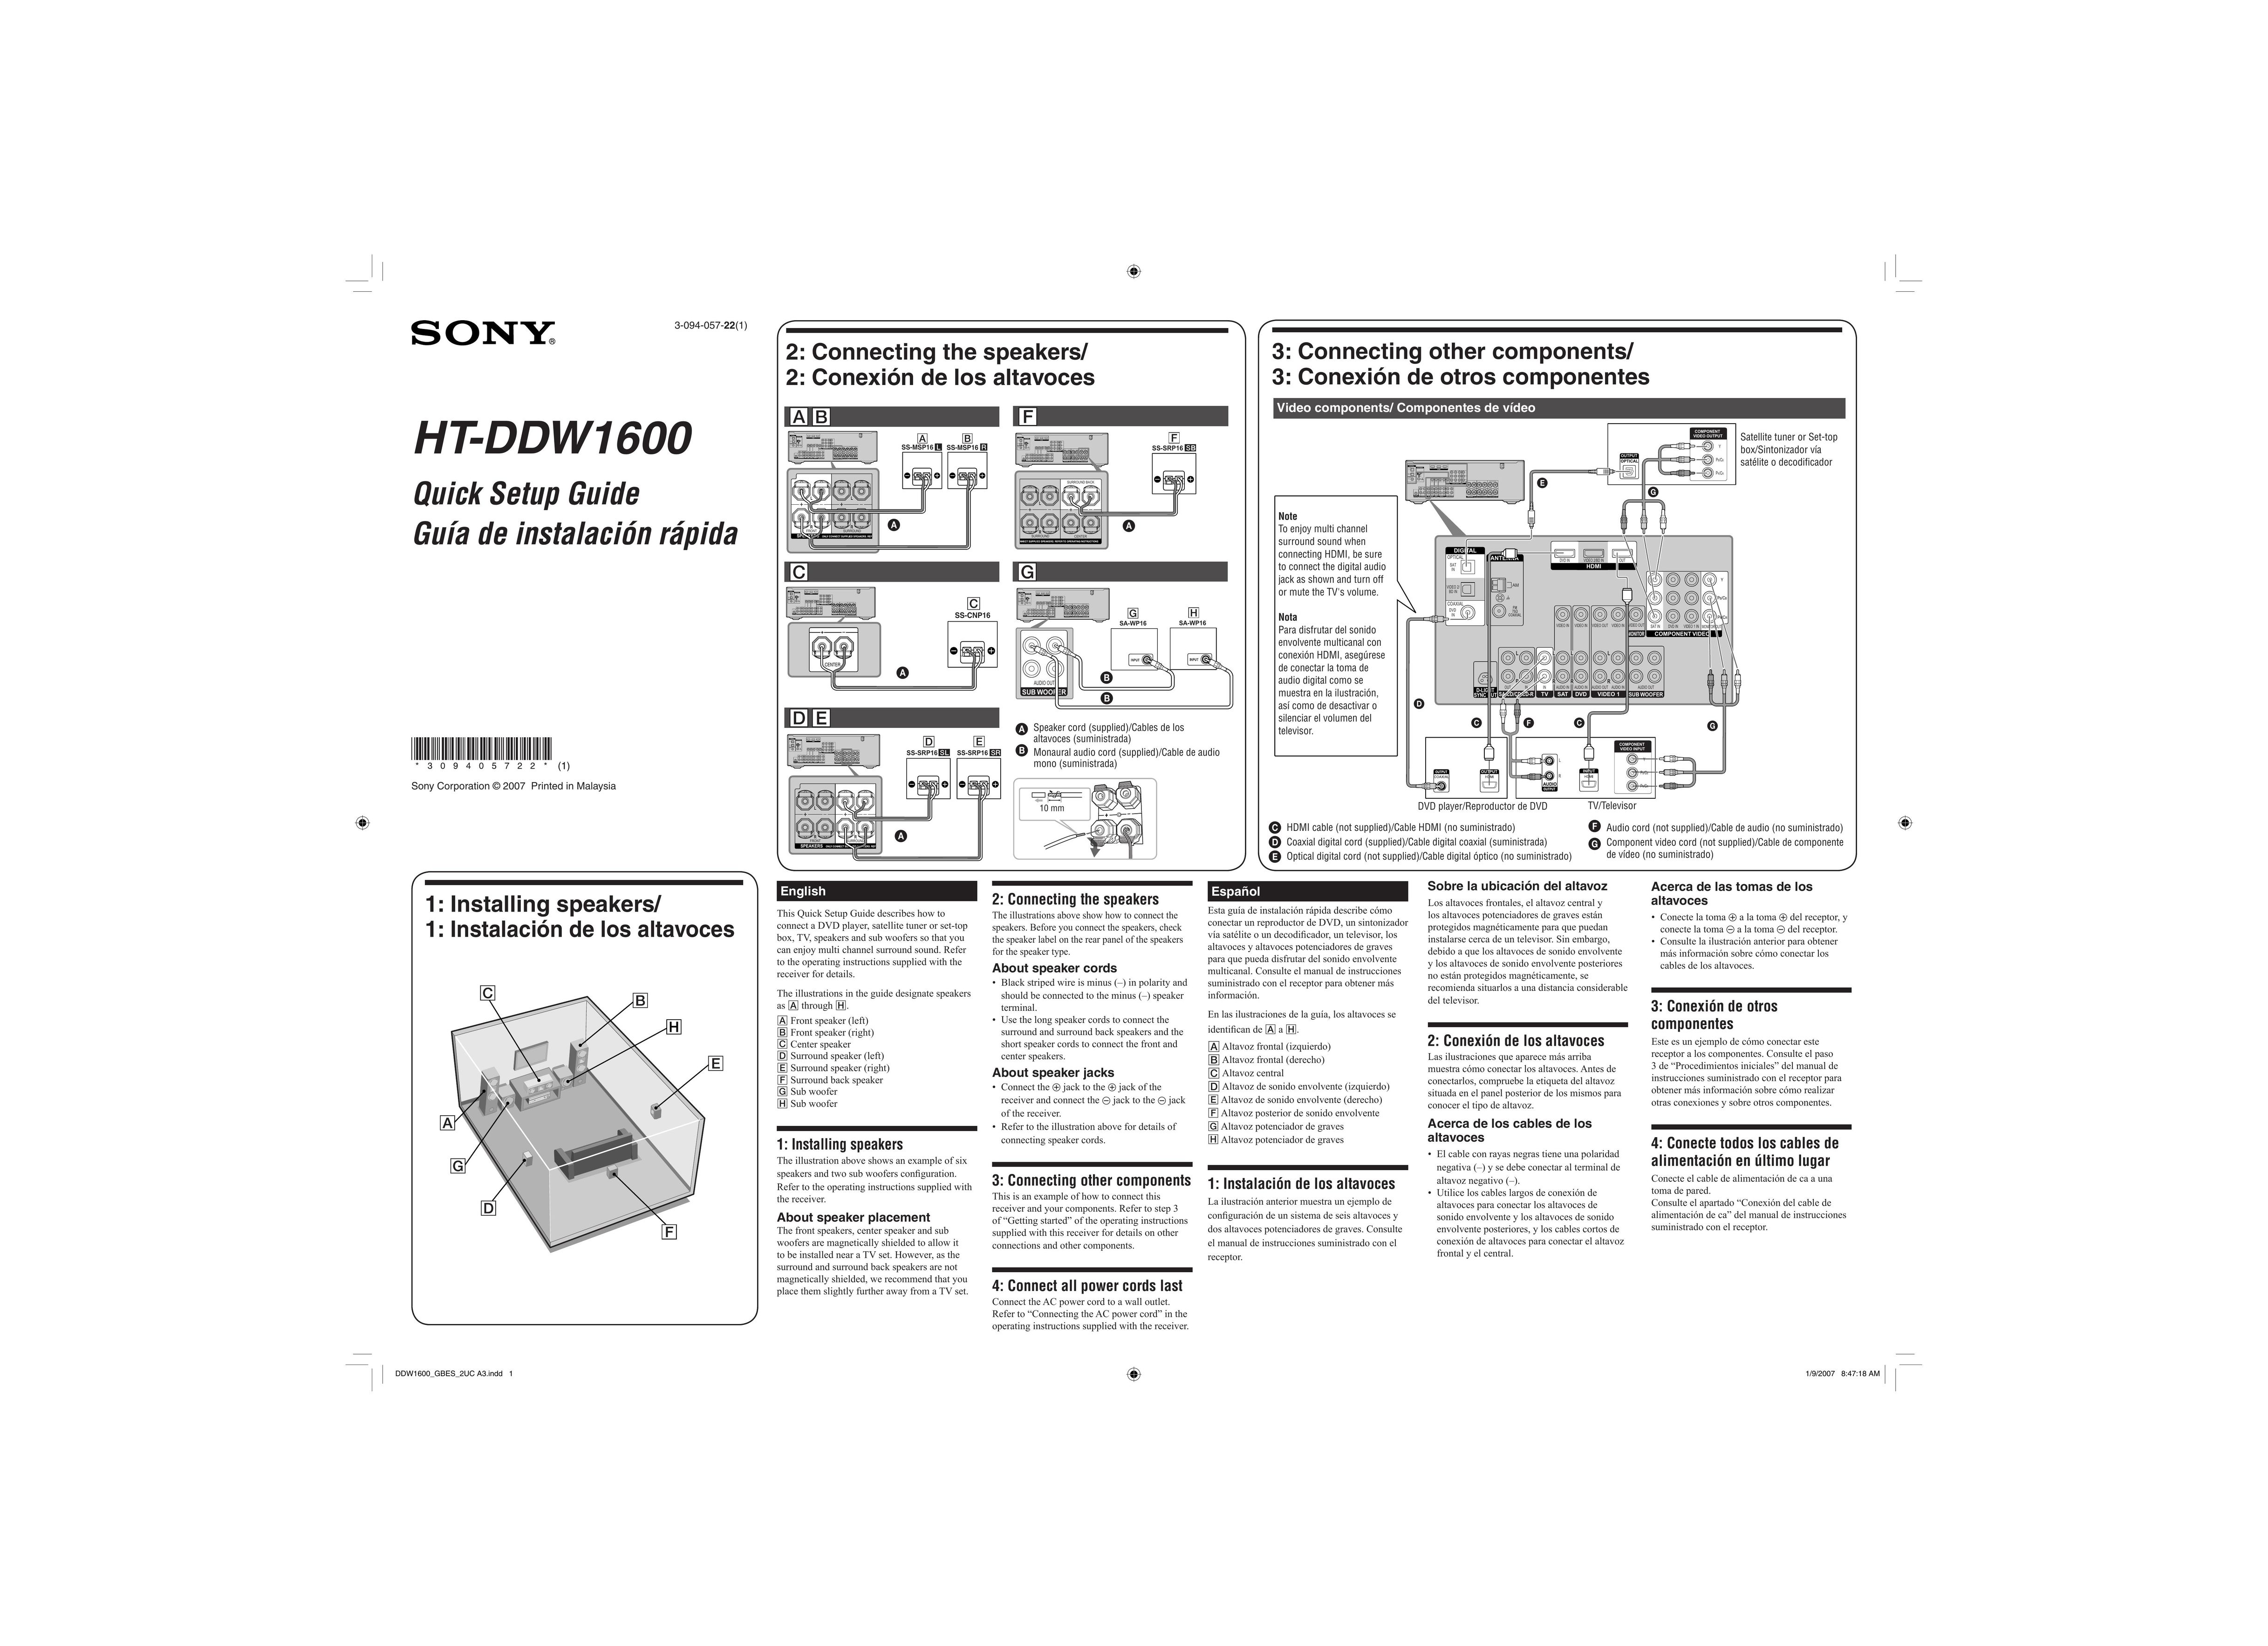 Sony 3-094-057-22(1) Home Theater System User Manual